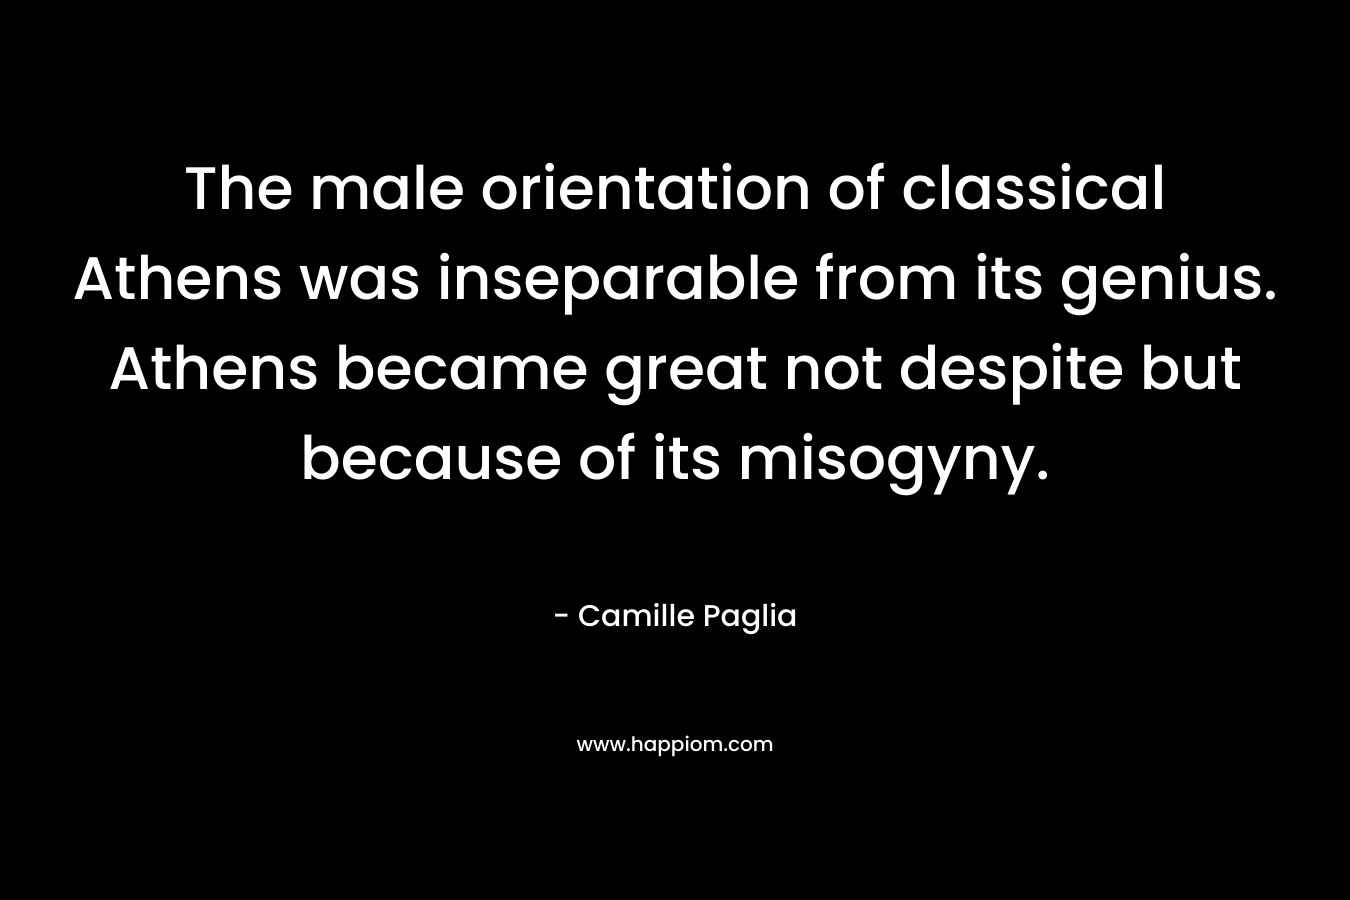 The male orientation of classical Athens was inseparable from its genius. Athens became great not despite but because of its misogyny.